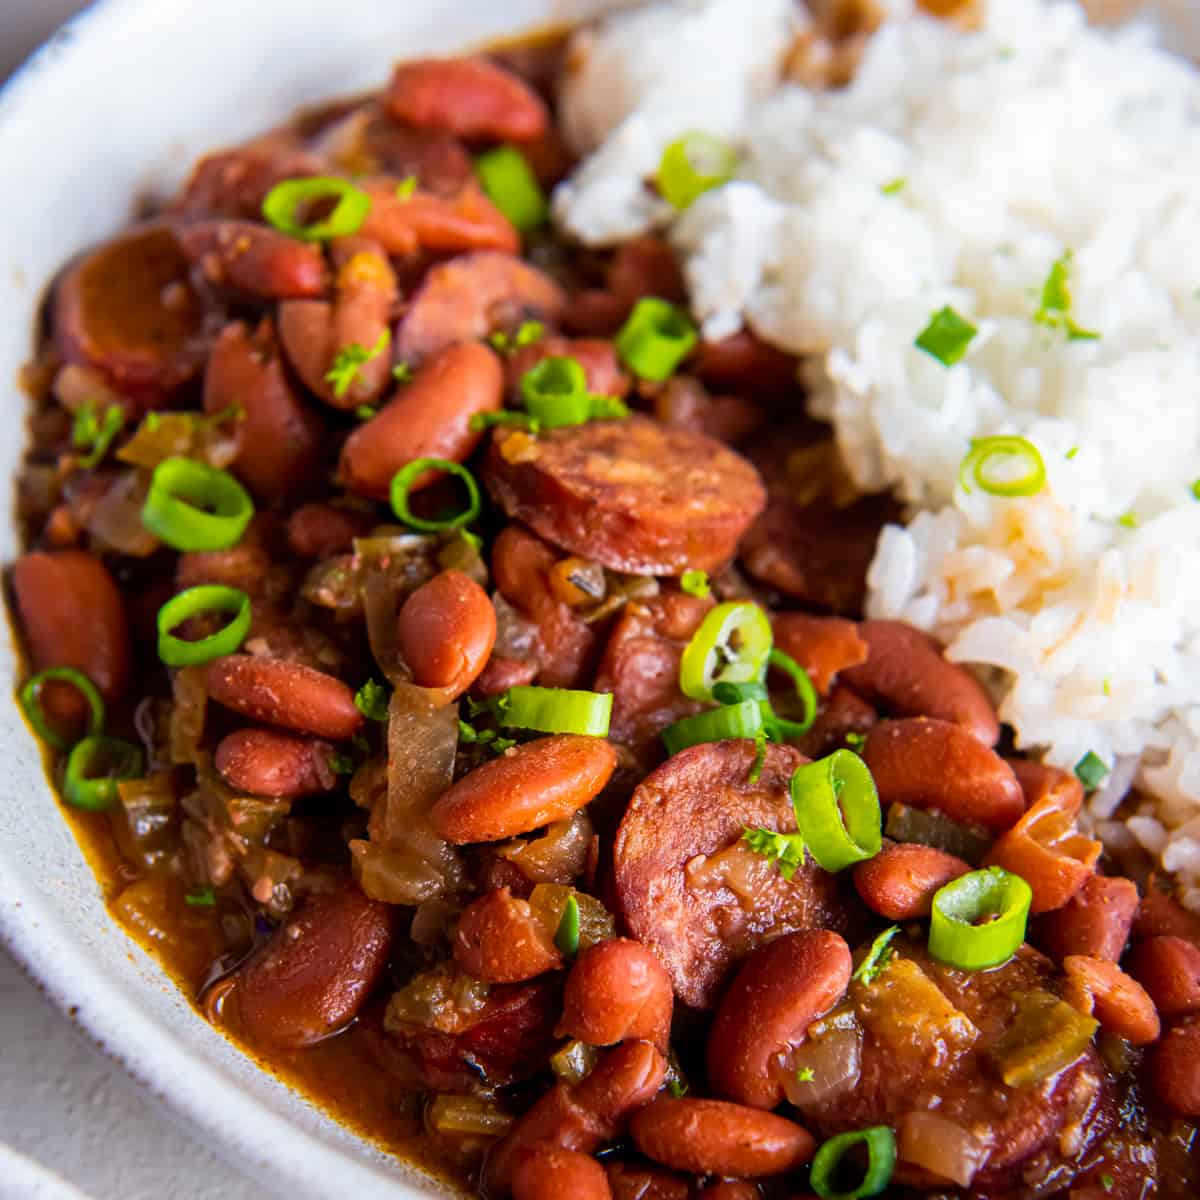 Slow Cooker Red Beans & Rice